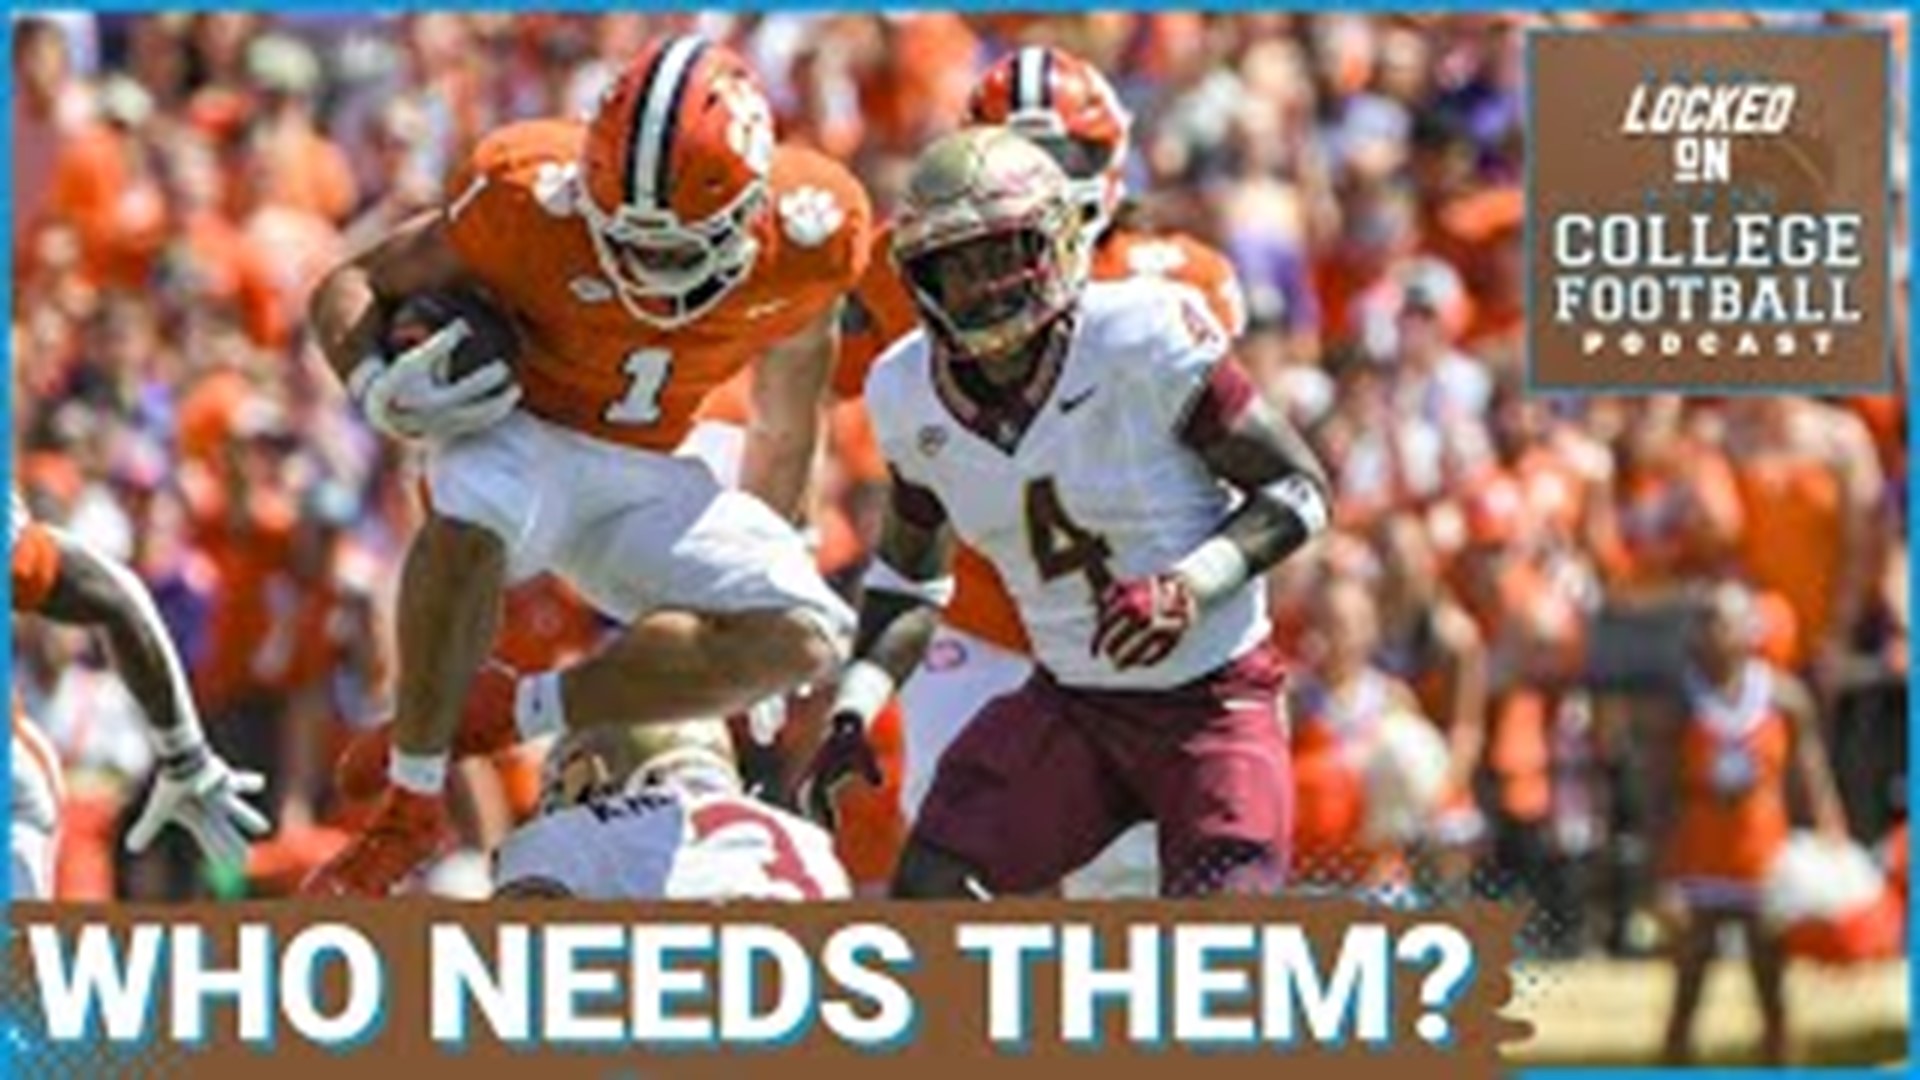 Florida State and Clemson have not stated, publicly, where their desired landing place would be should they succeed in leaving the ACC.